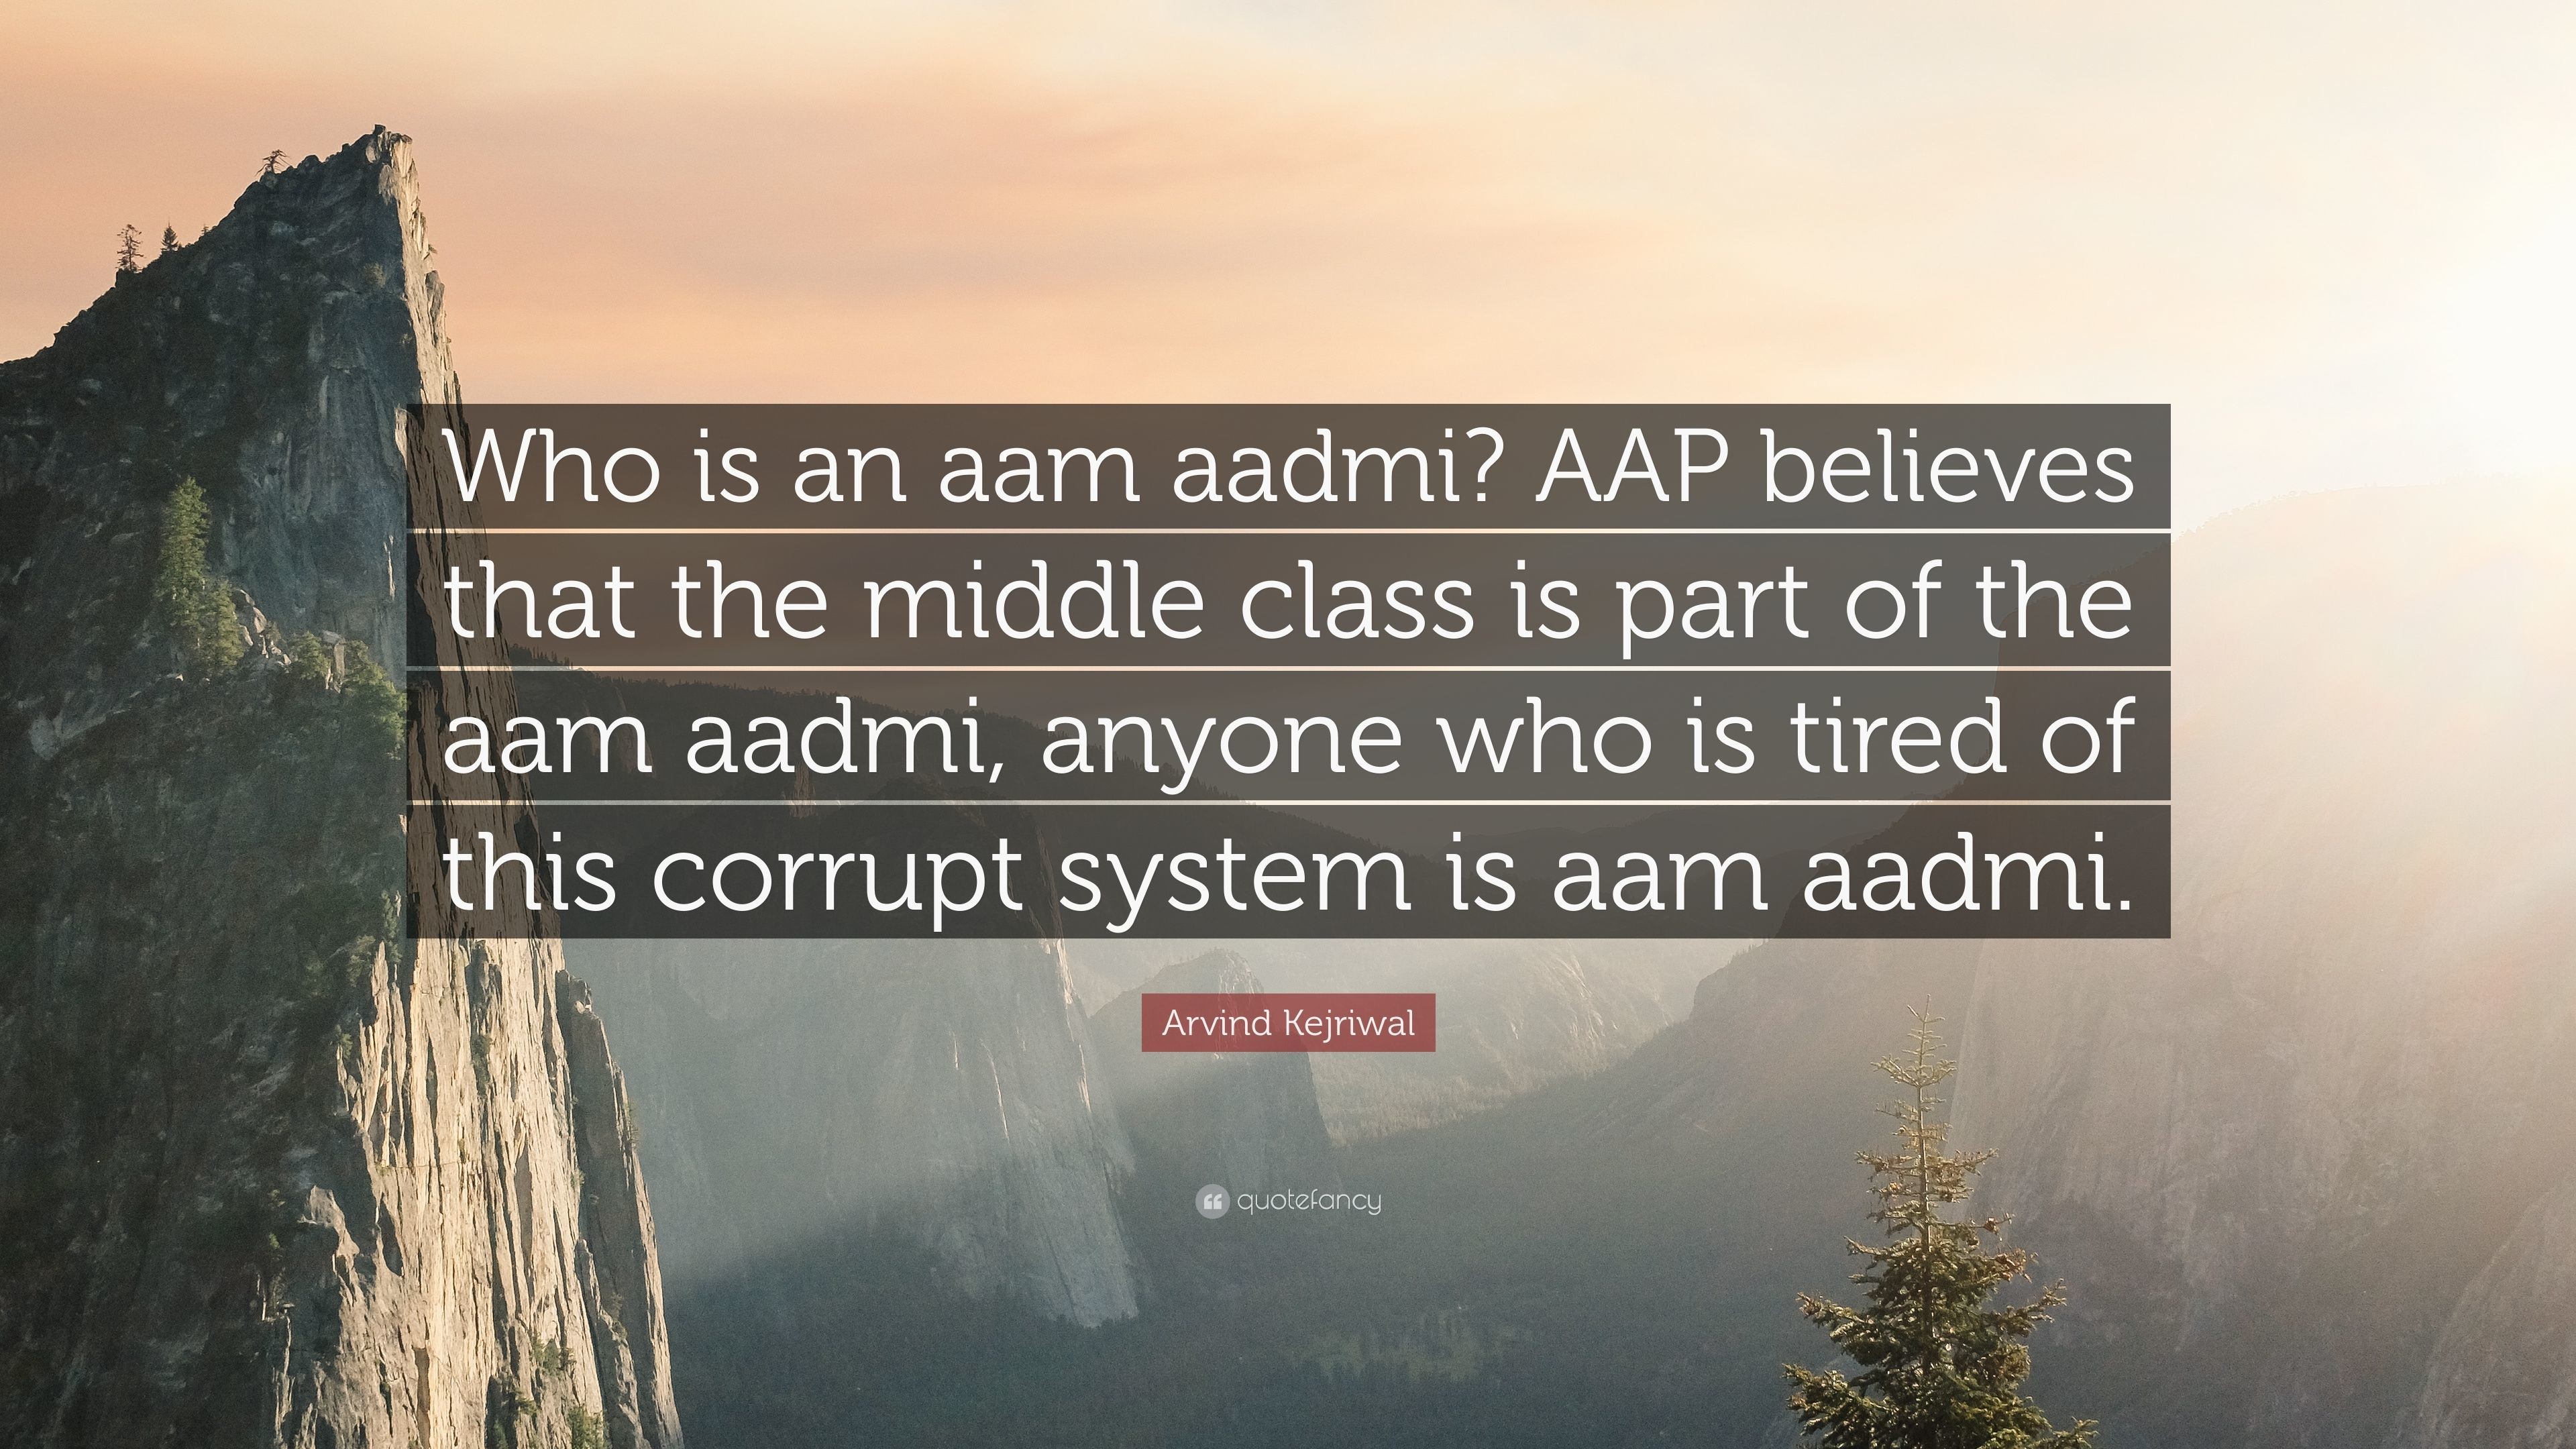 3840x2160 Arvind Kejriwal Quote: “Who is an aam aadmi? AAP believes that the middle